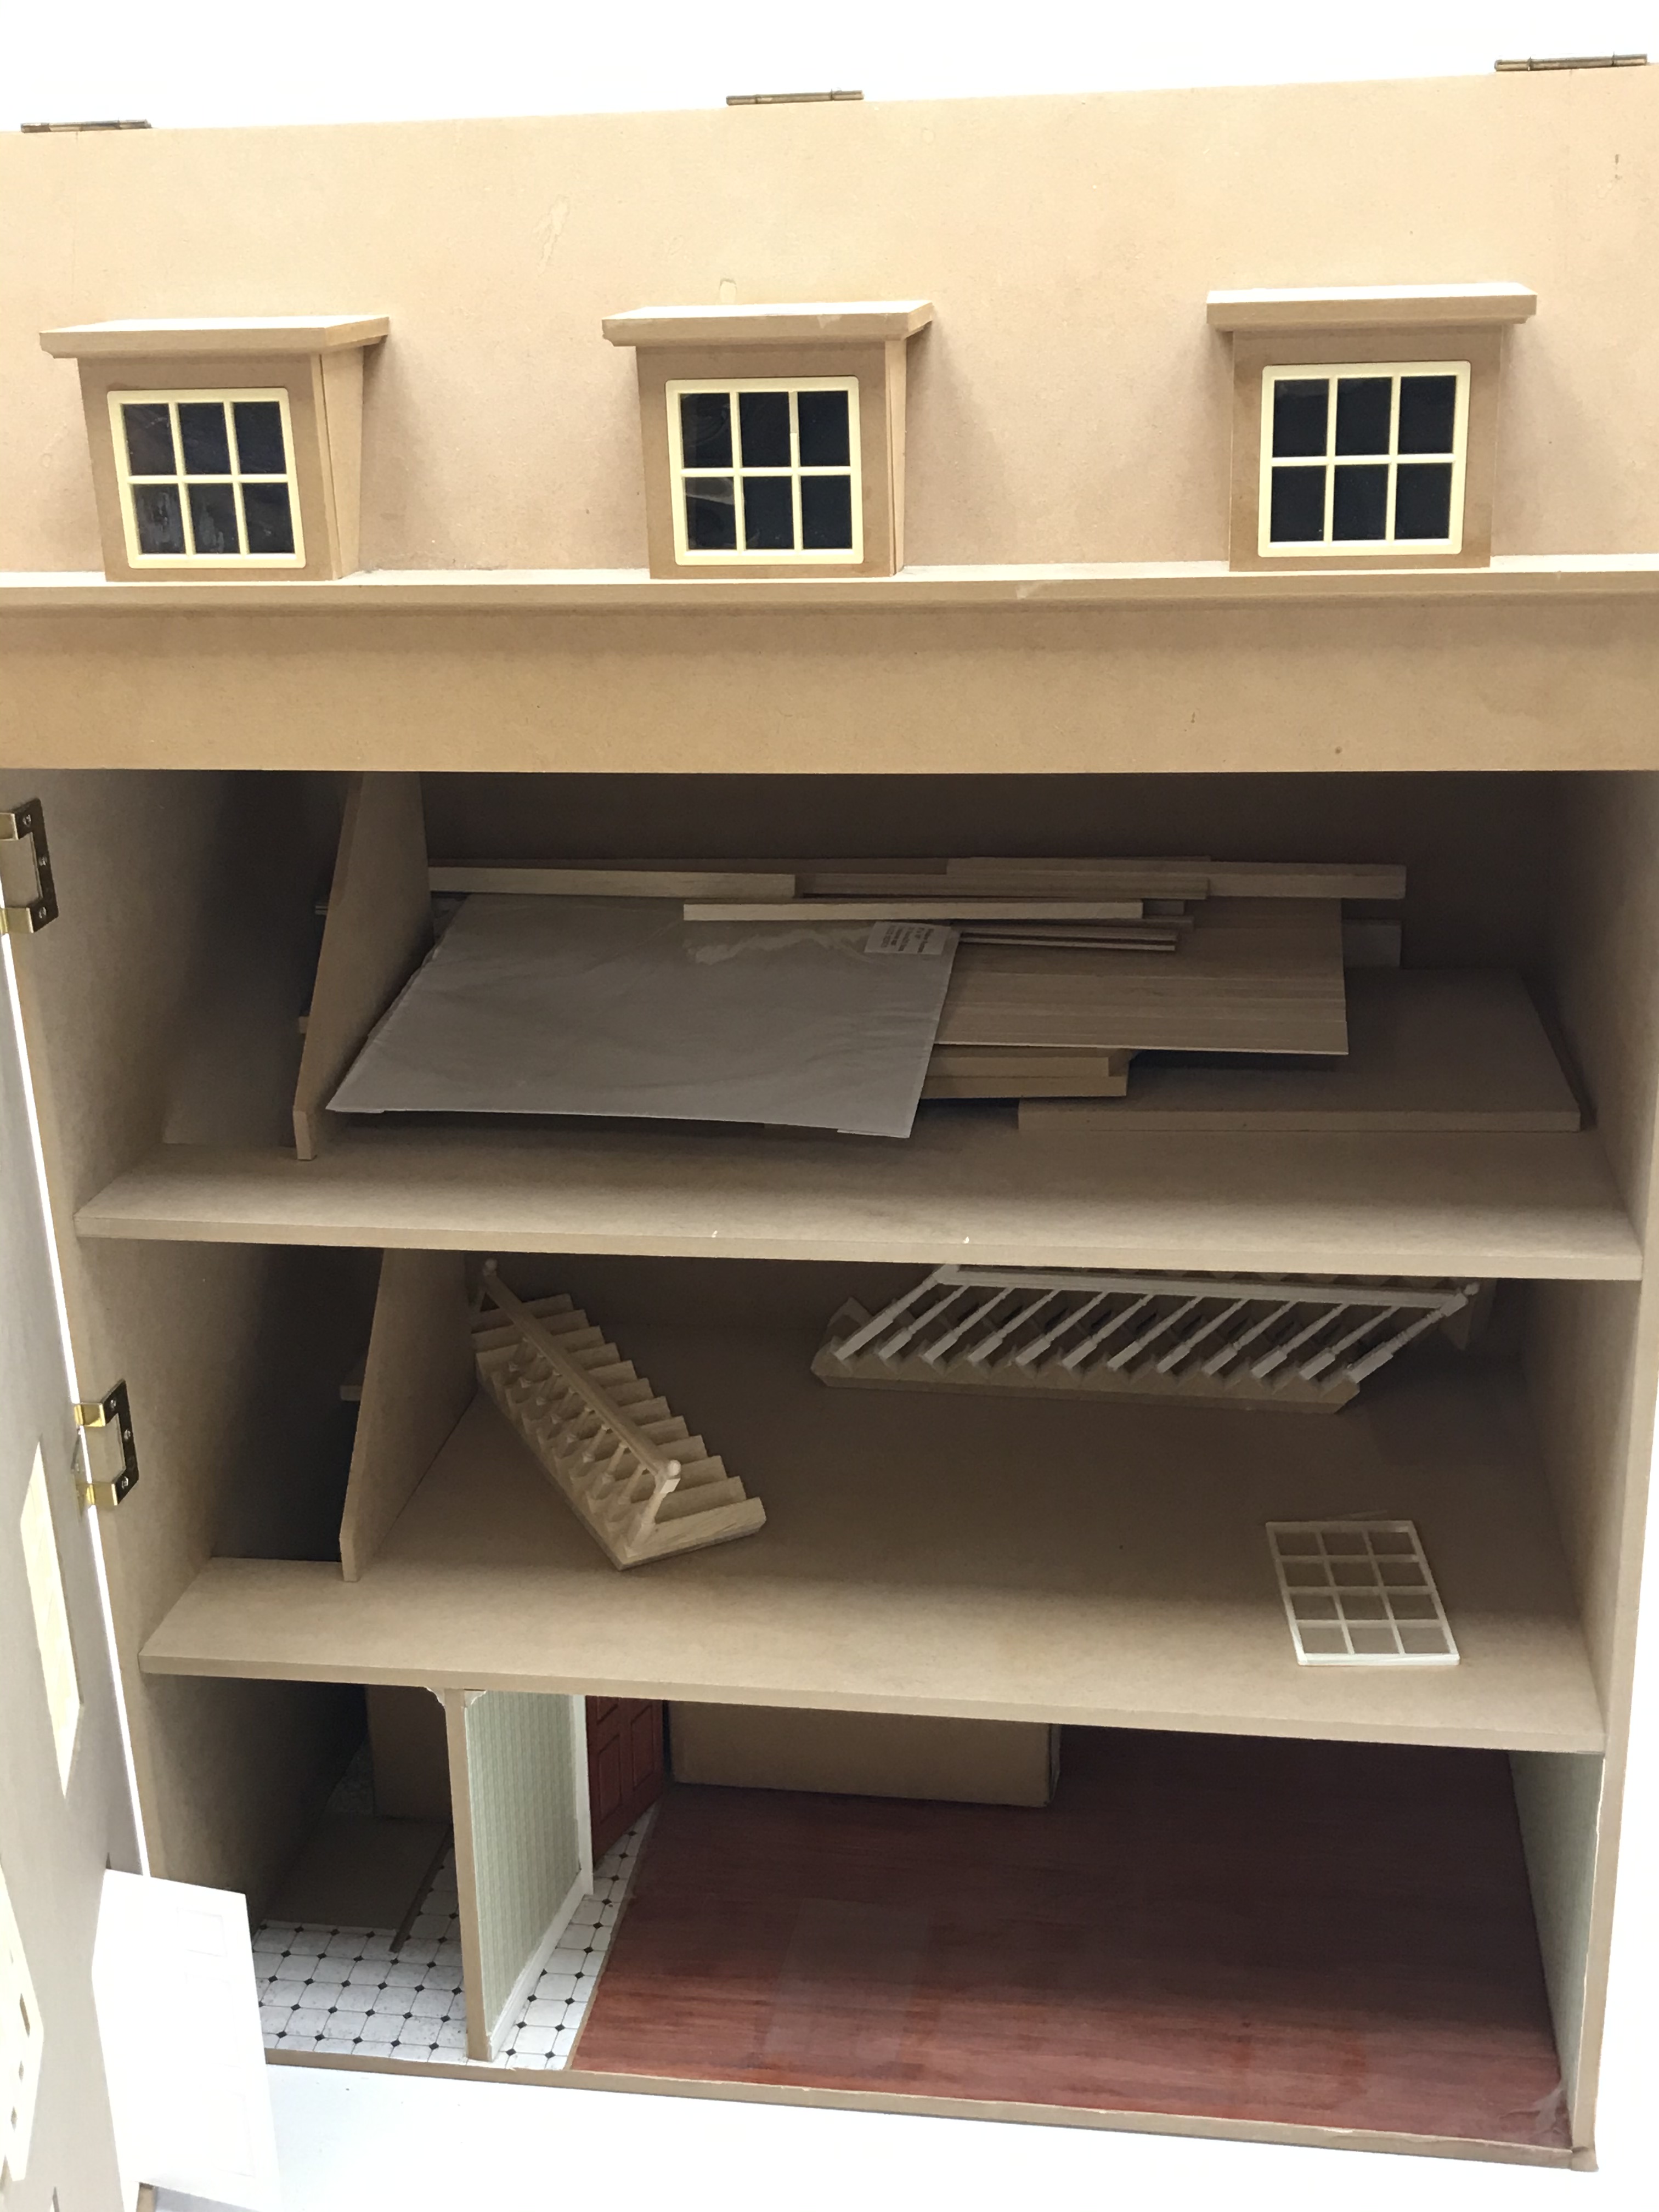 Regency style three storey Doll's House, with wall paper, stairs, skirting, - Image 3 of 3